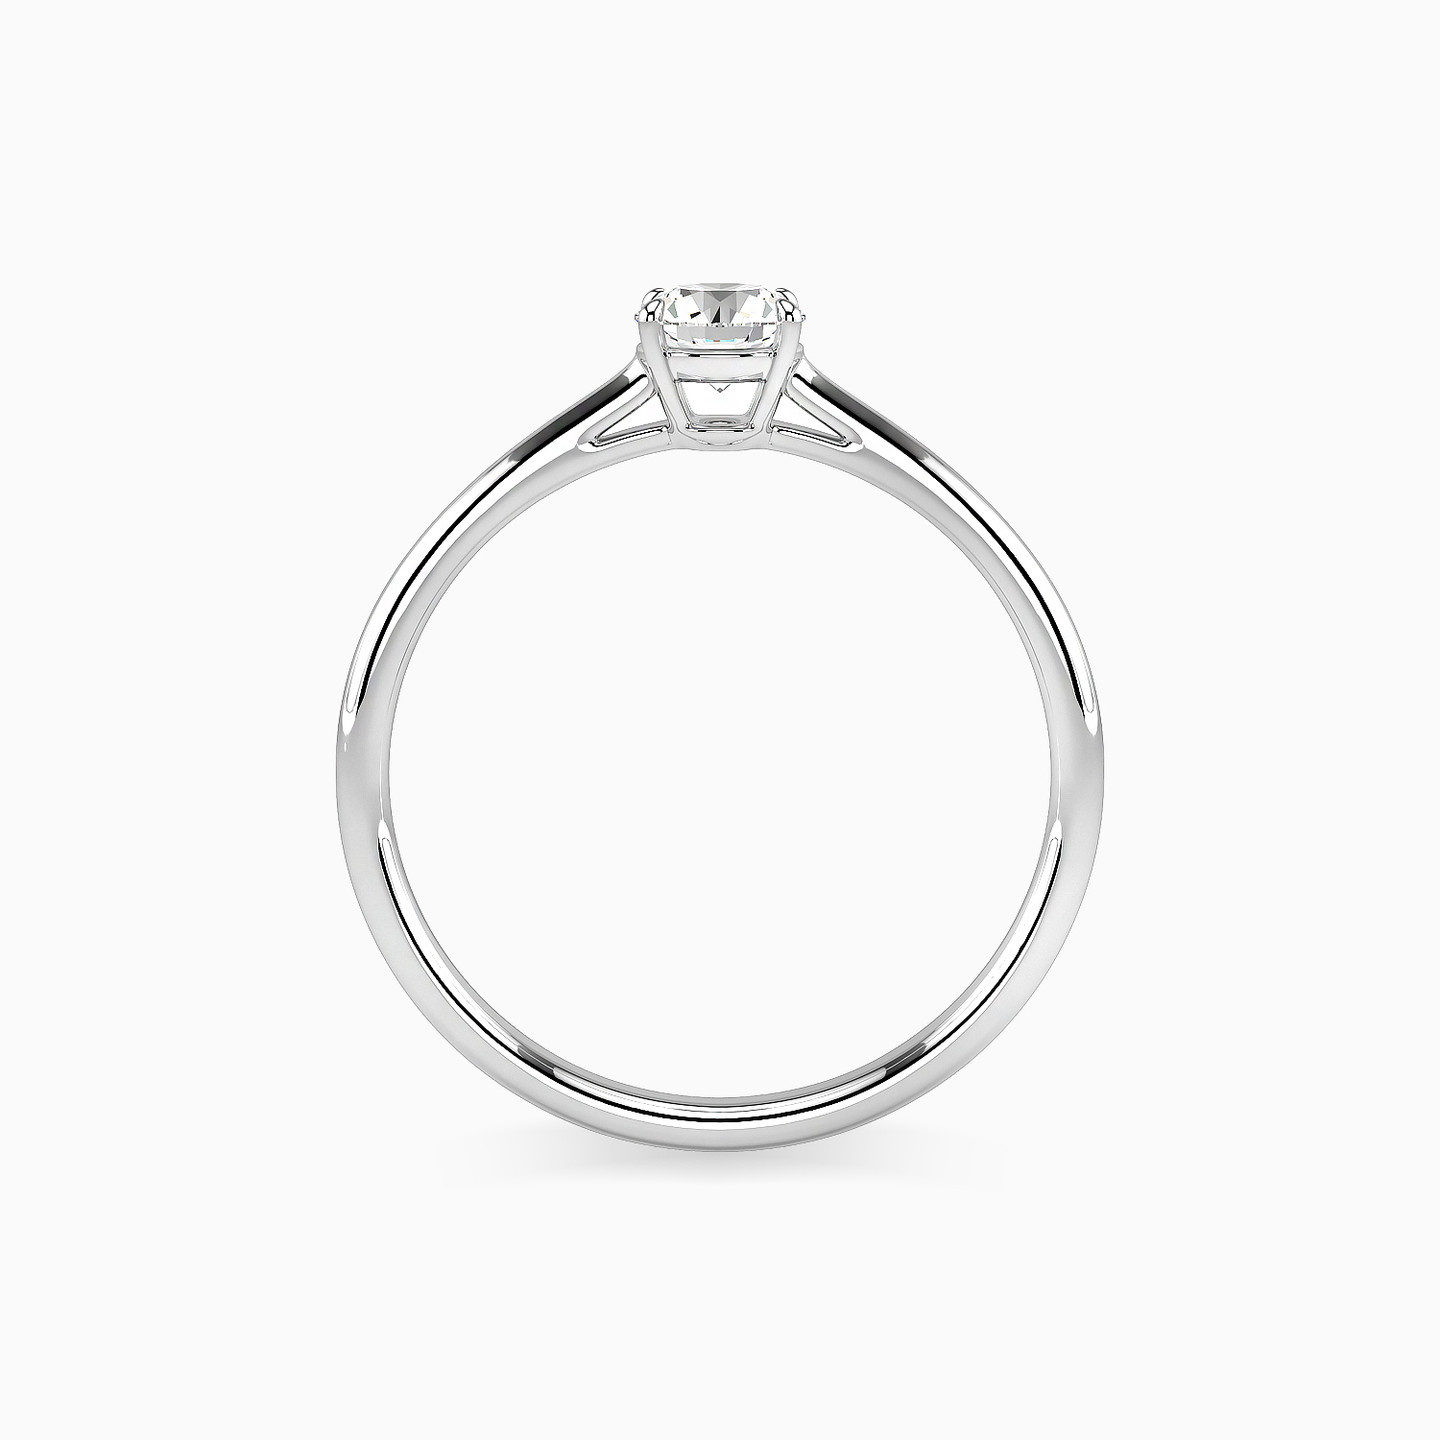 18K Gold Diamond Solitaire Ring - 3